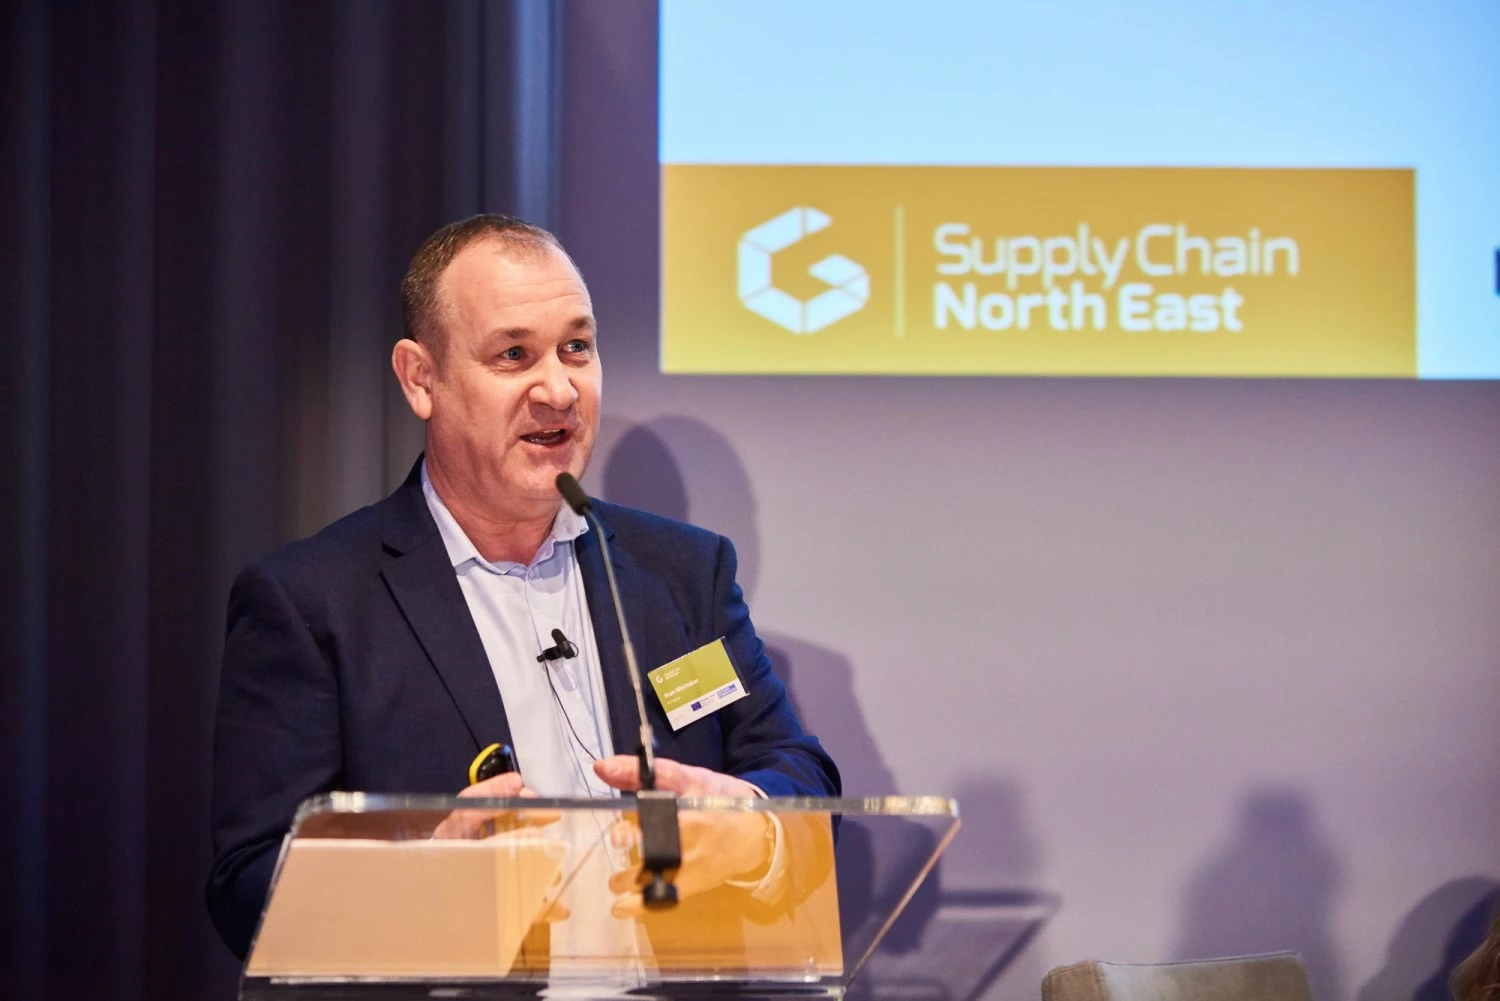 Alan Whittaker, Programme Manager of Supply Chain North East